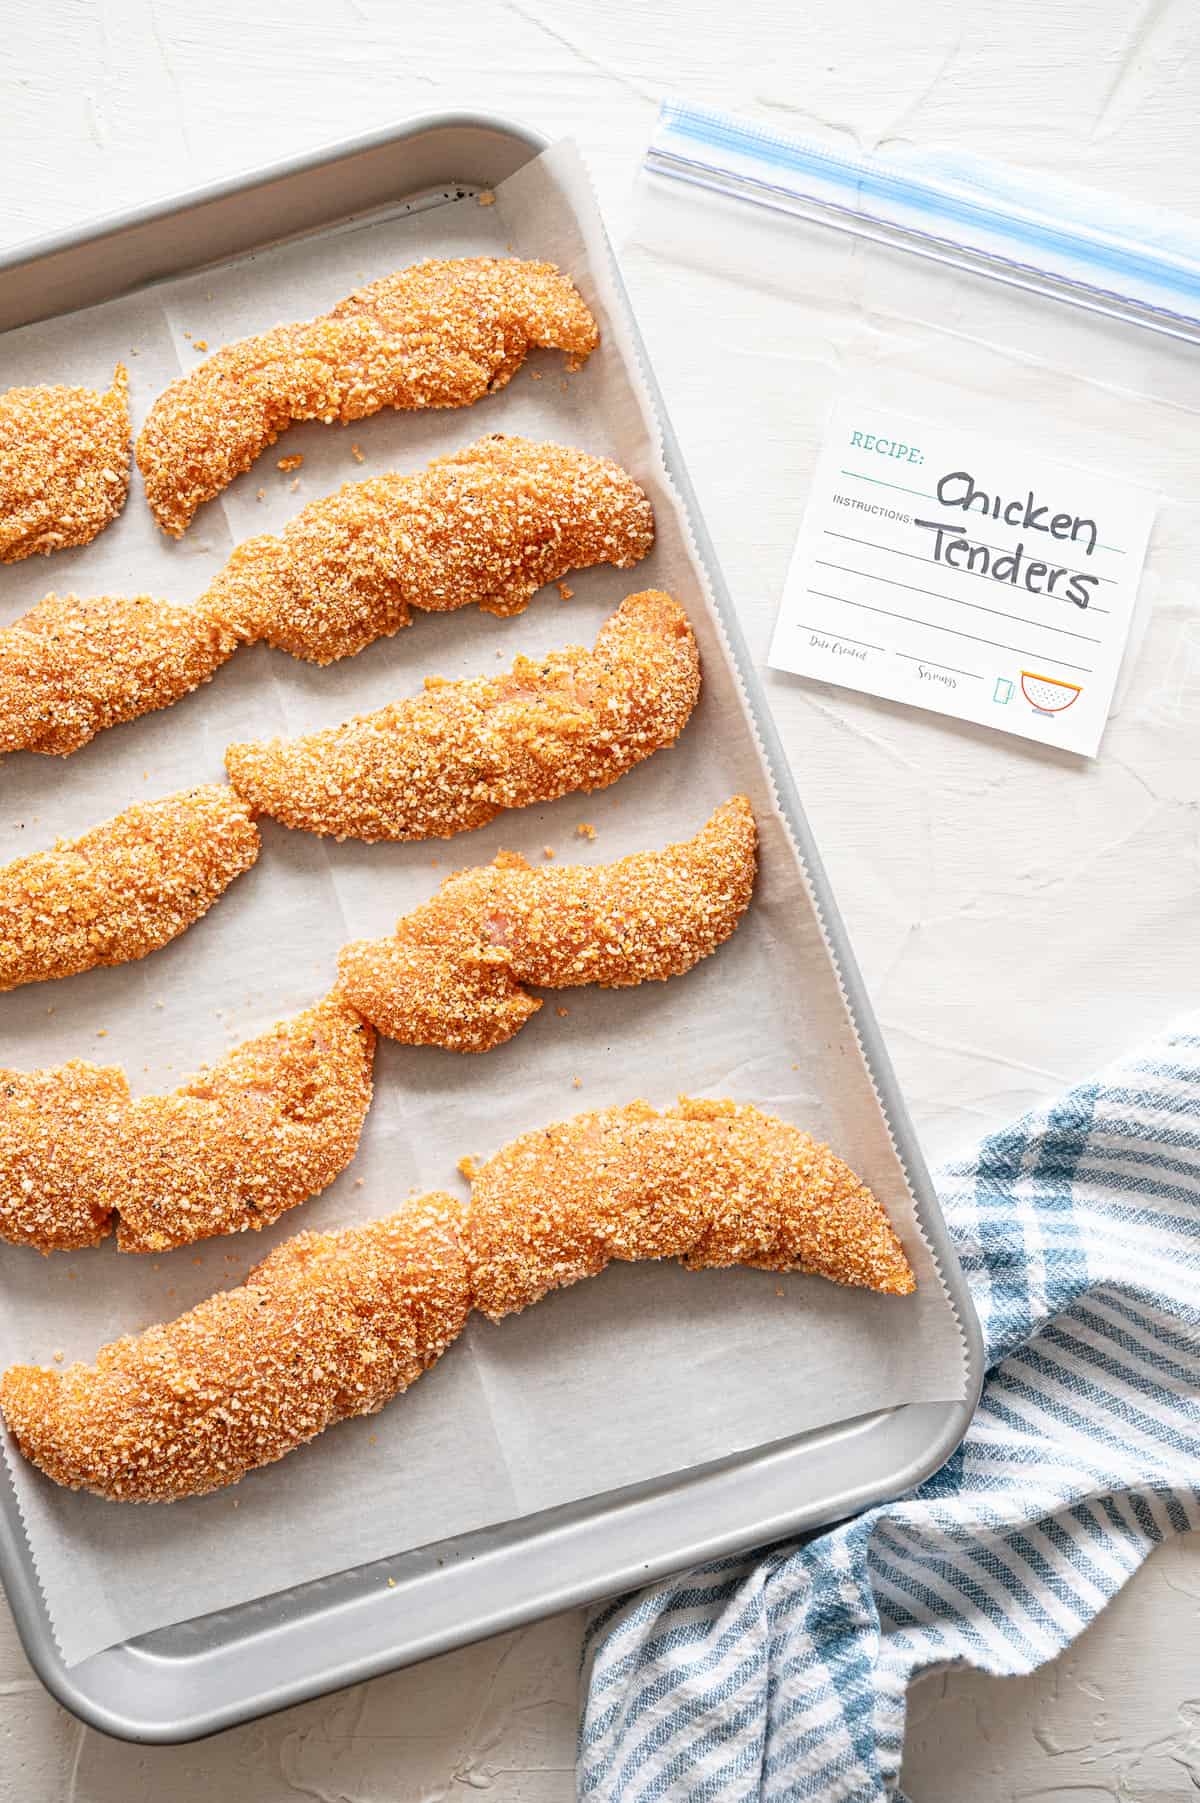 Breaded chicken tenders on a sheet pan ready to flash freeze.